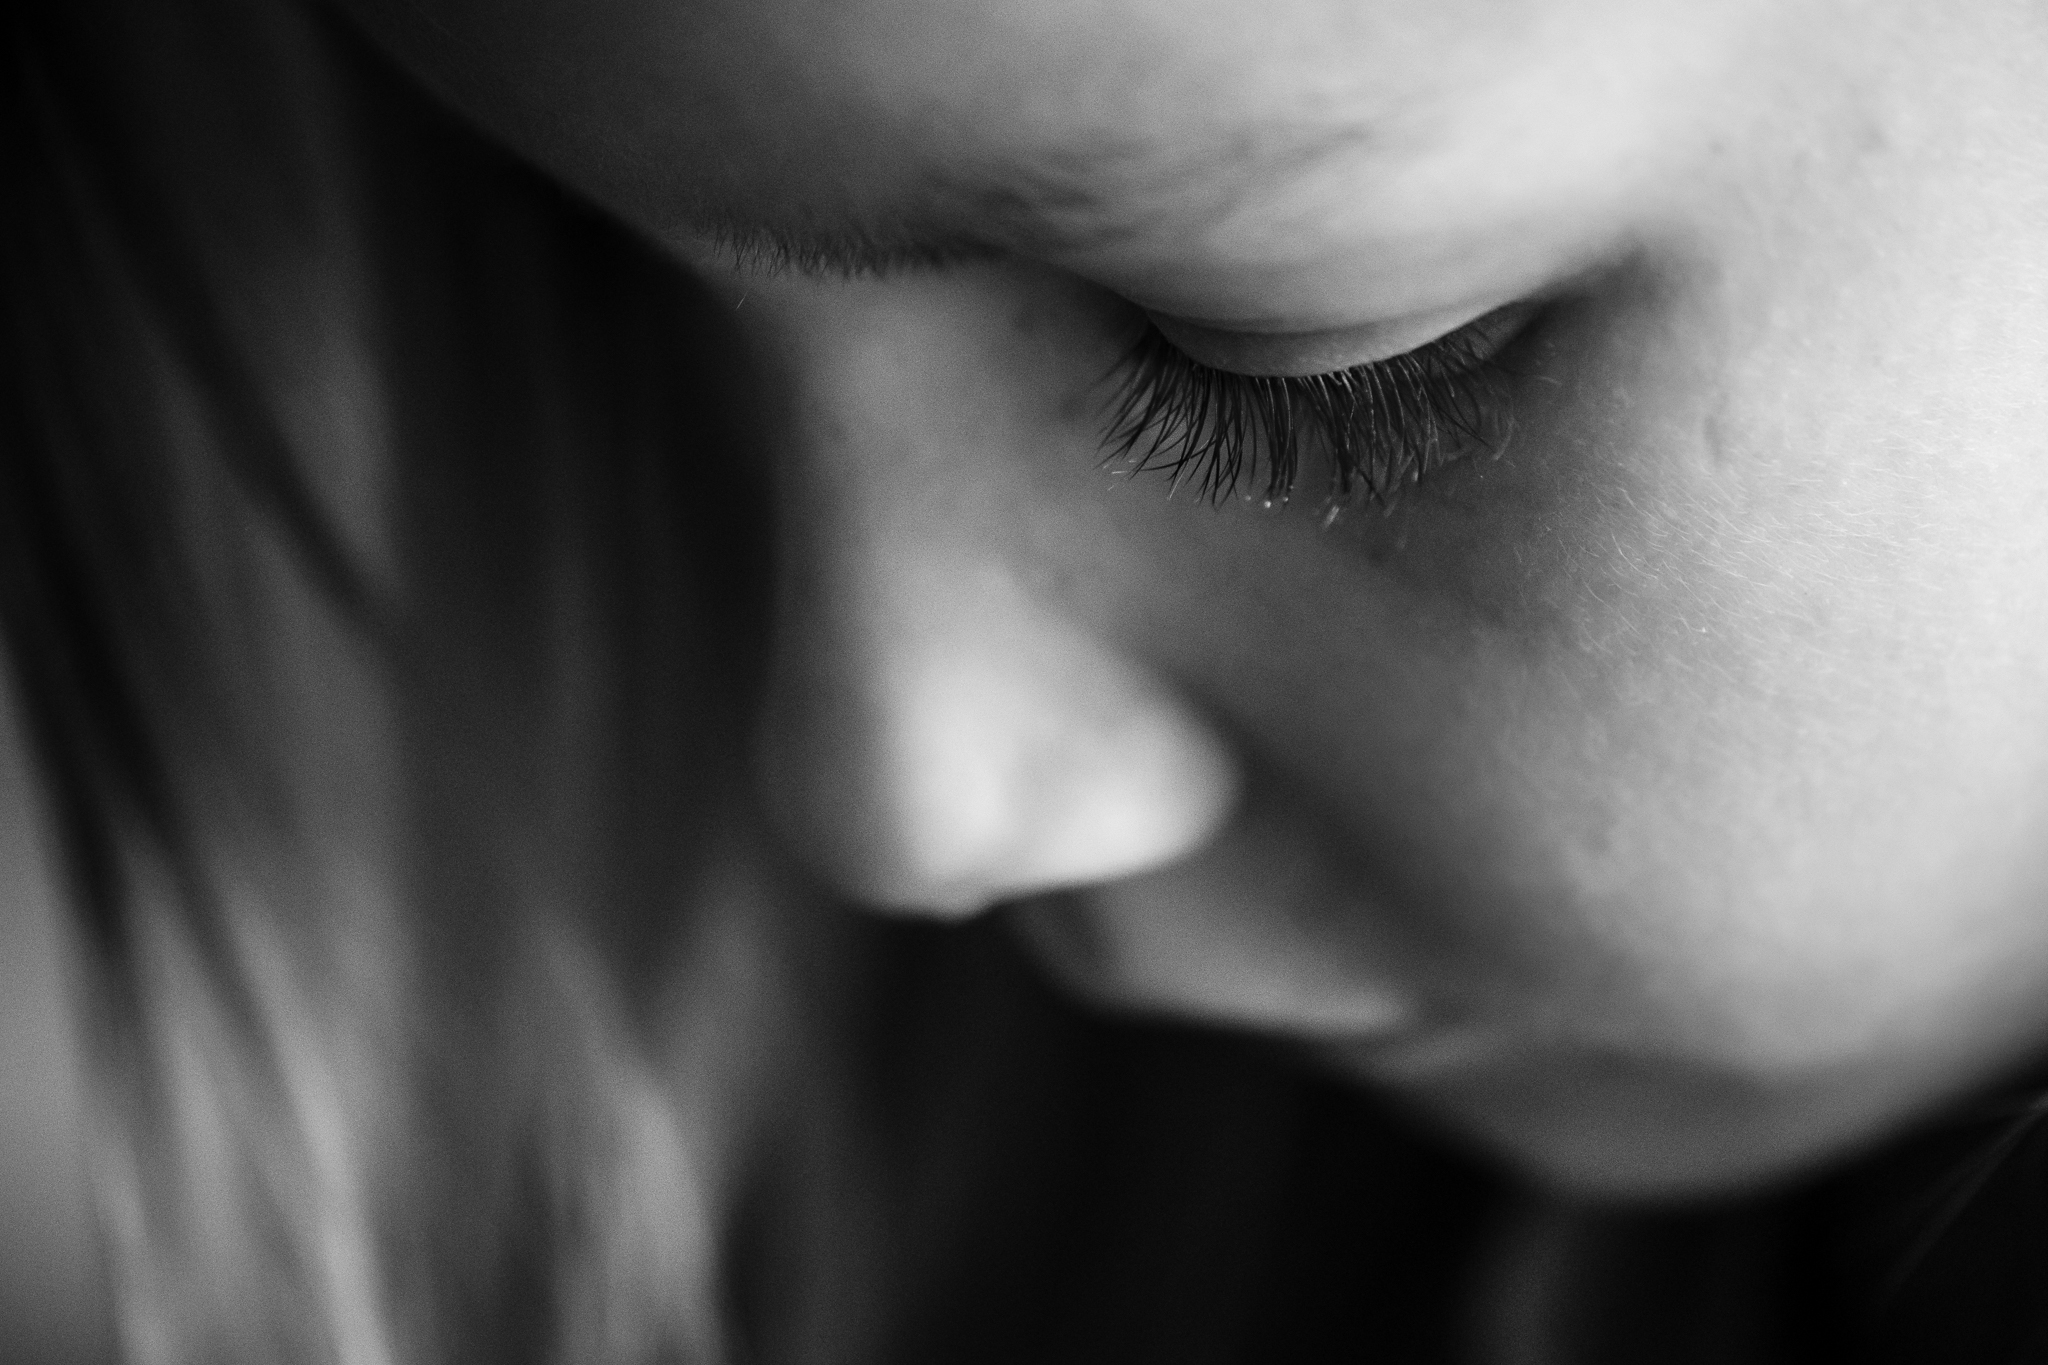 Close up of child's eye lashes in black and white